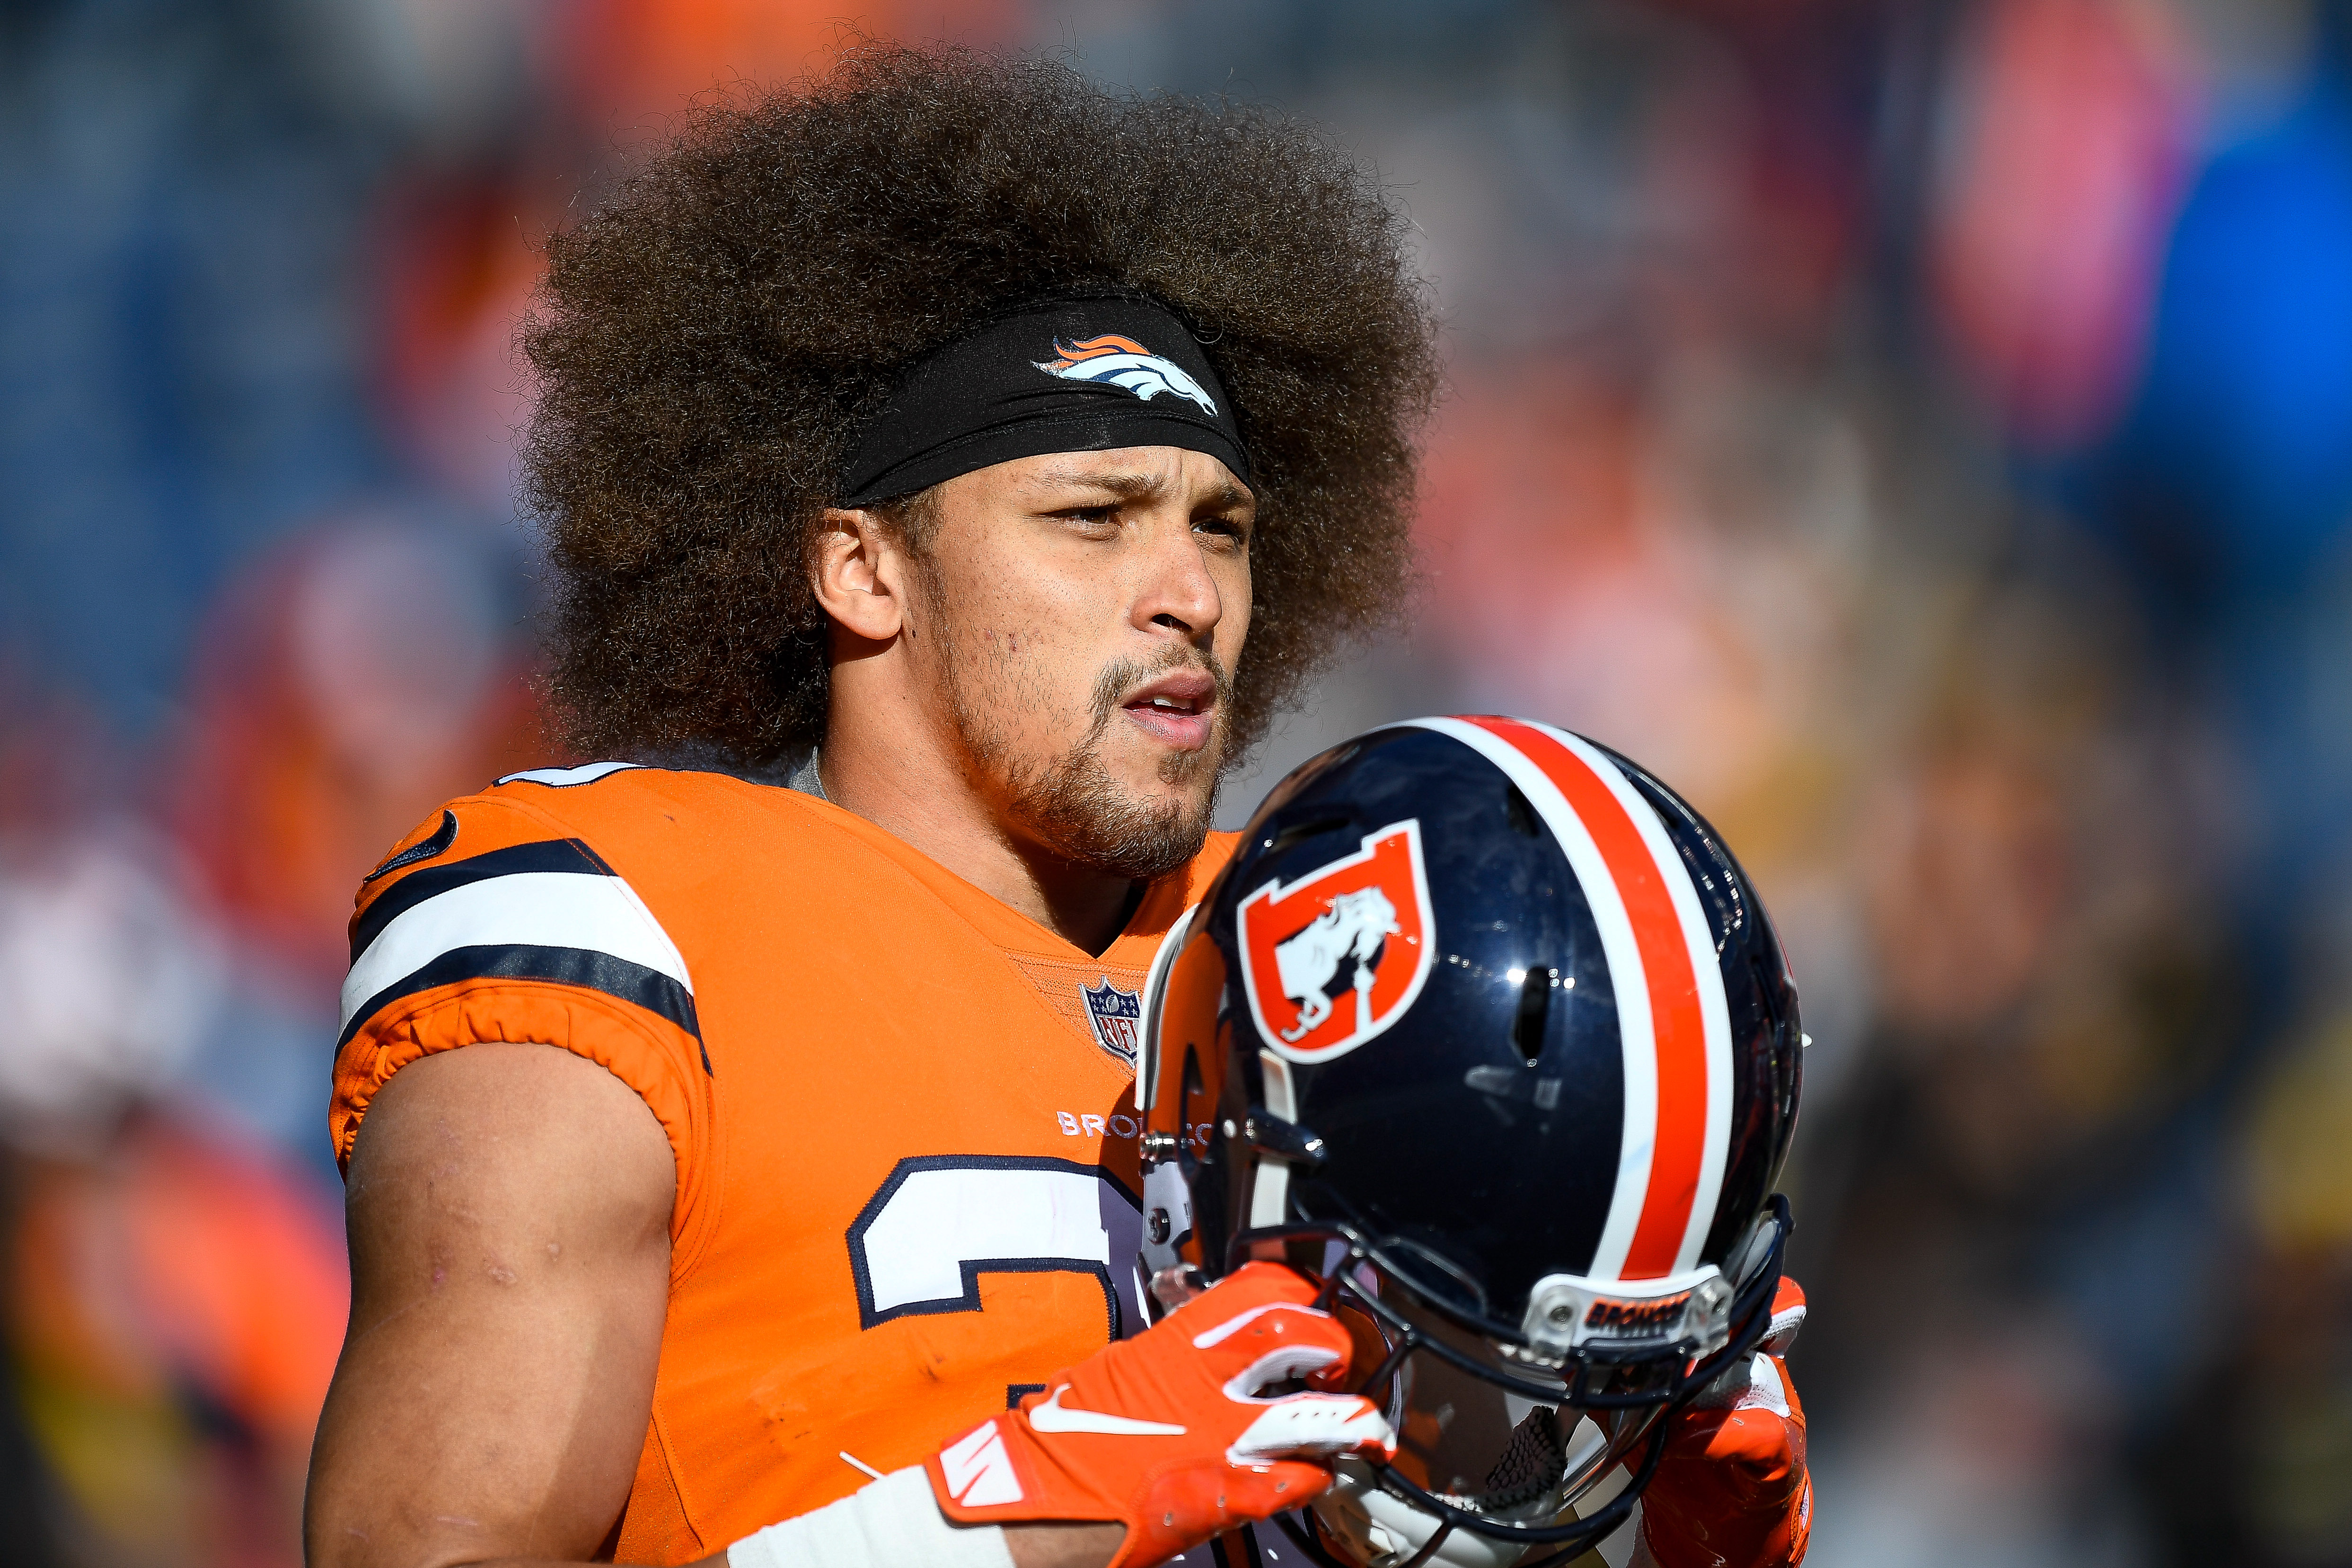 ‘Pure luck’ on Broncos part in signing Phillip Lindsay, says DMac